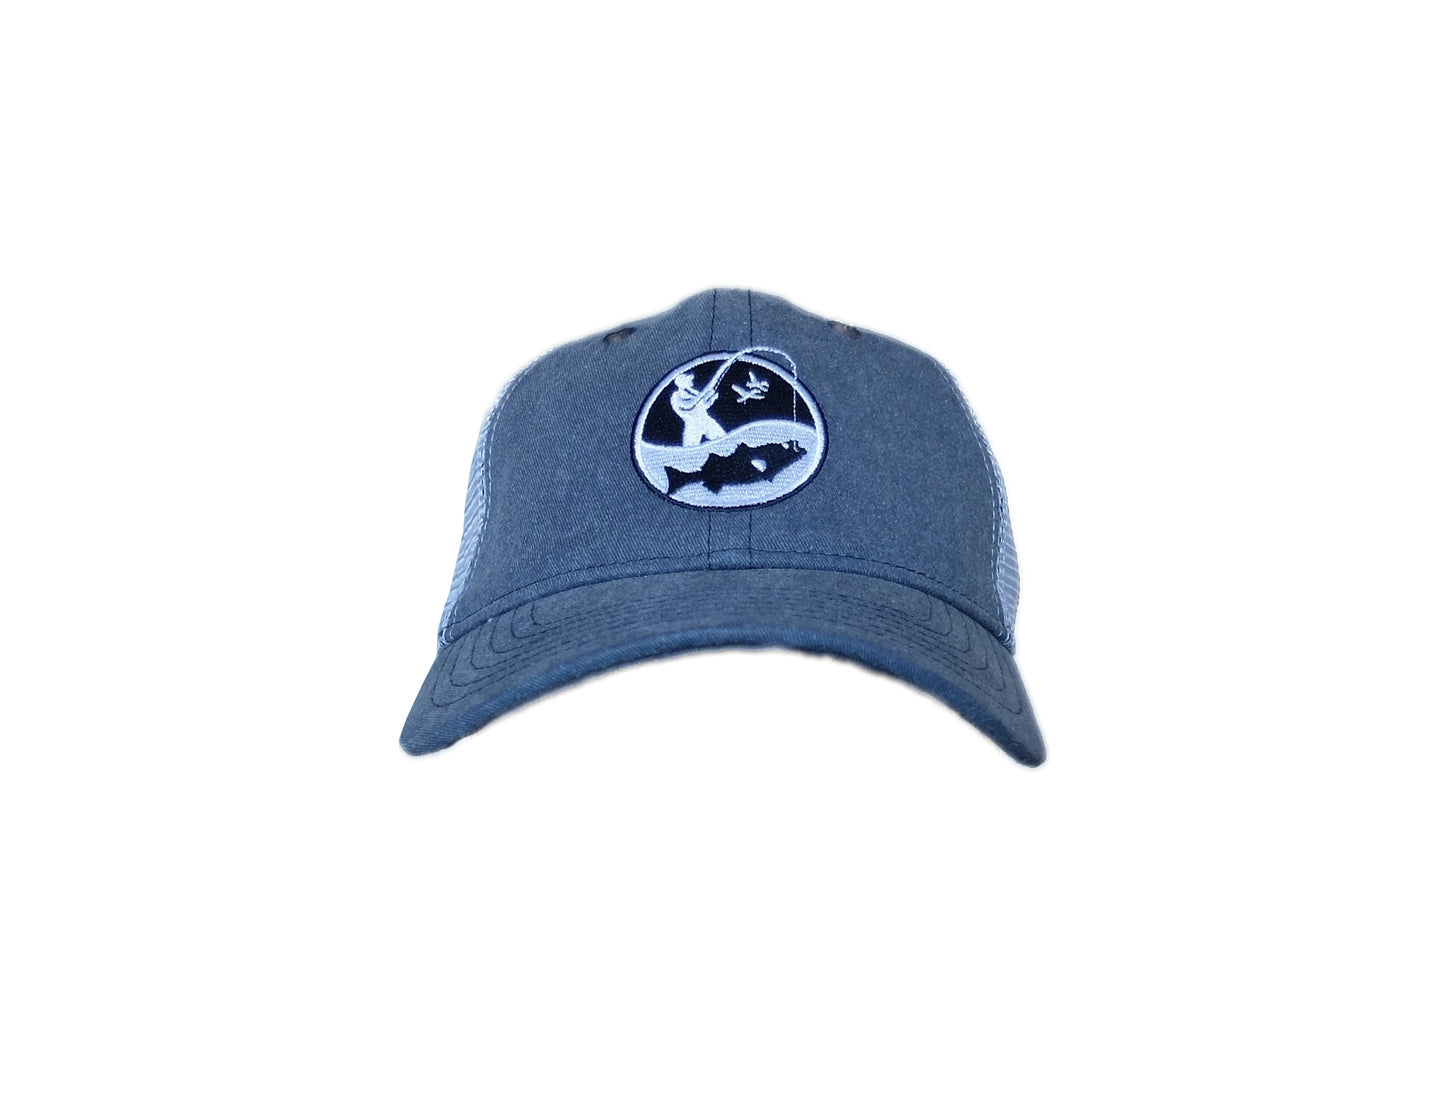 front view of navy and white Angler trucker cap with round navy blue and white embroidered fisherman logo